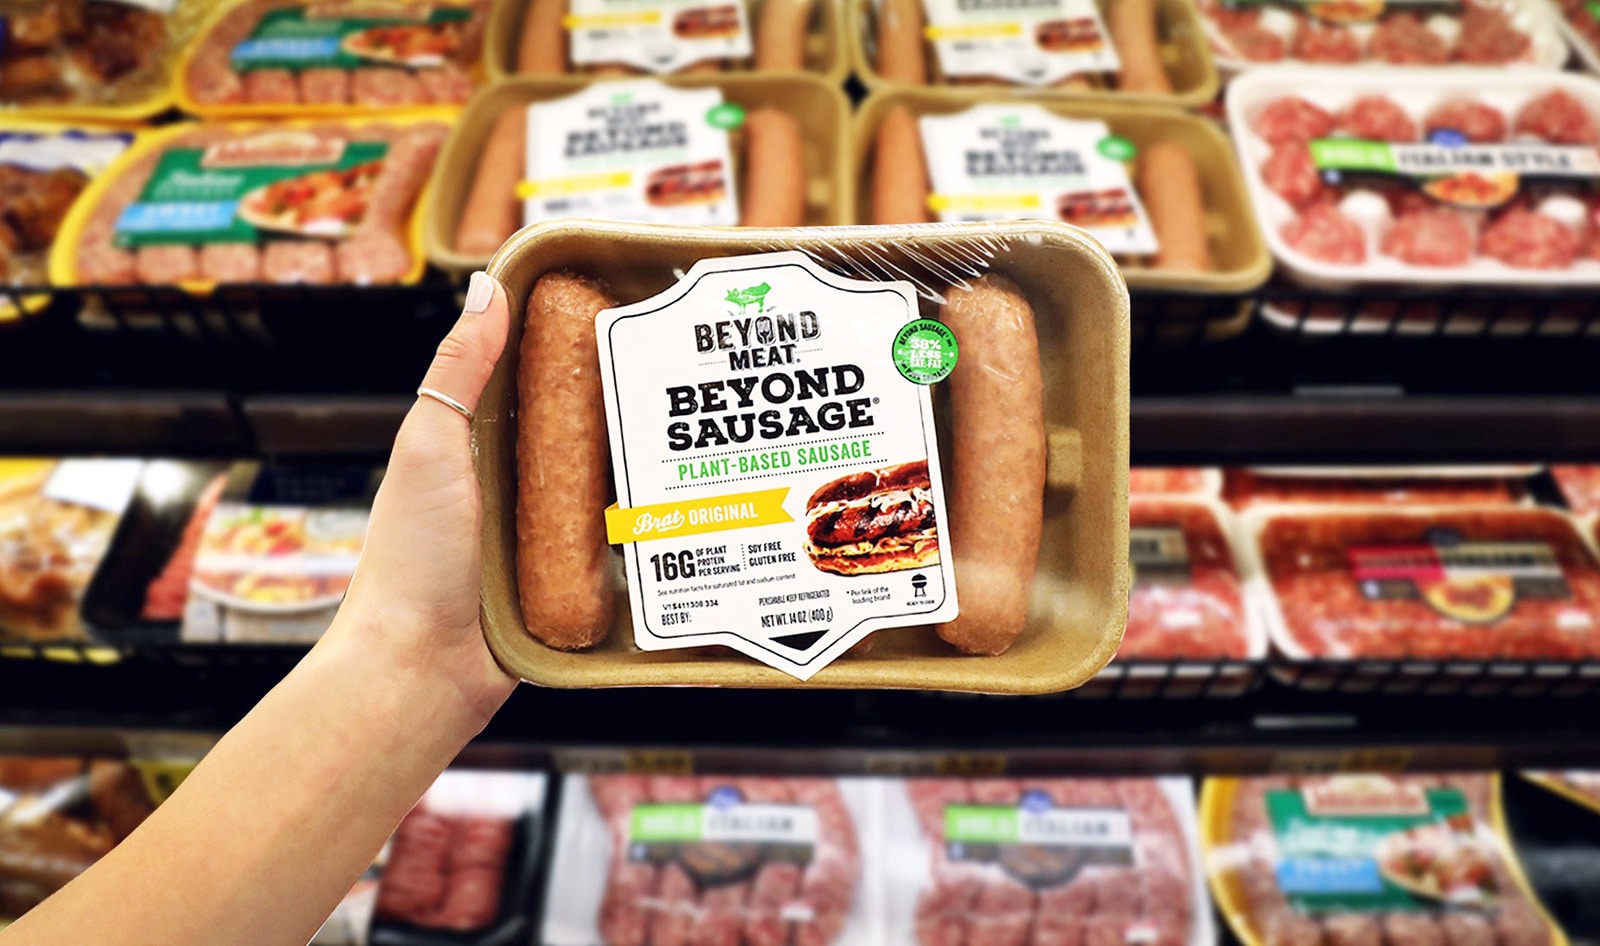 Kroger Study: When Stocked in the Meat Department, Sales of Plant-Based Meats Spike by 23 Percent